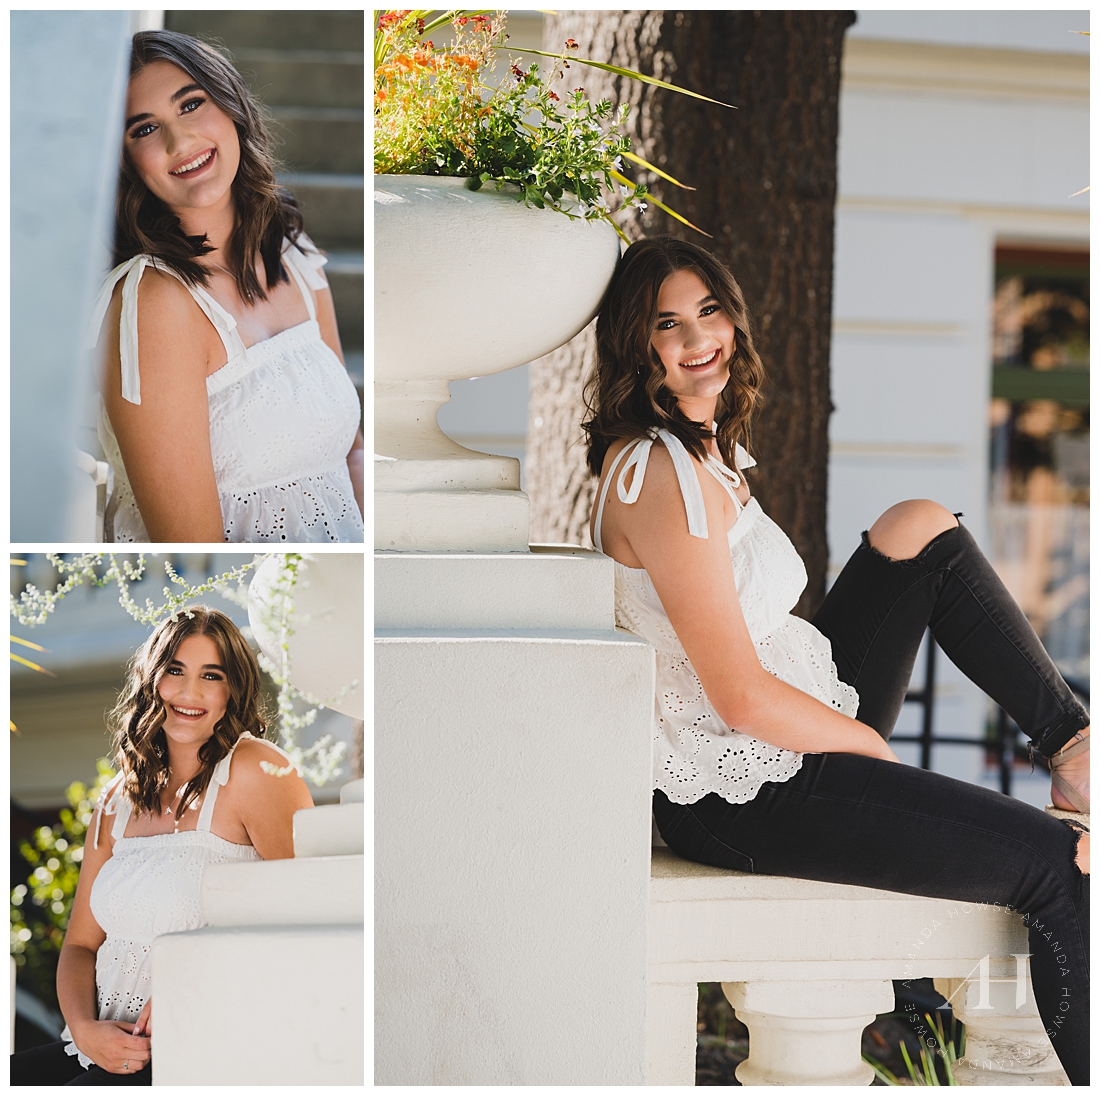 Fun Outdoor Senior Portraits in Tacoma | Photographed by the Best Tacoma Senior Photographer Amanda Howse Photography